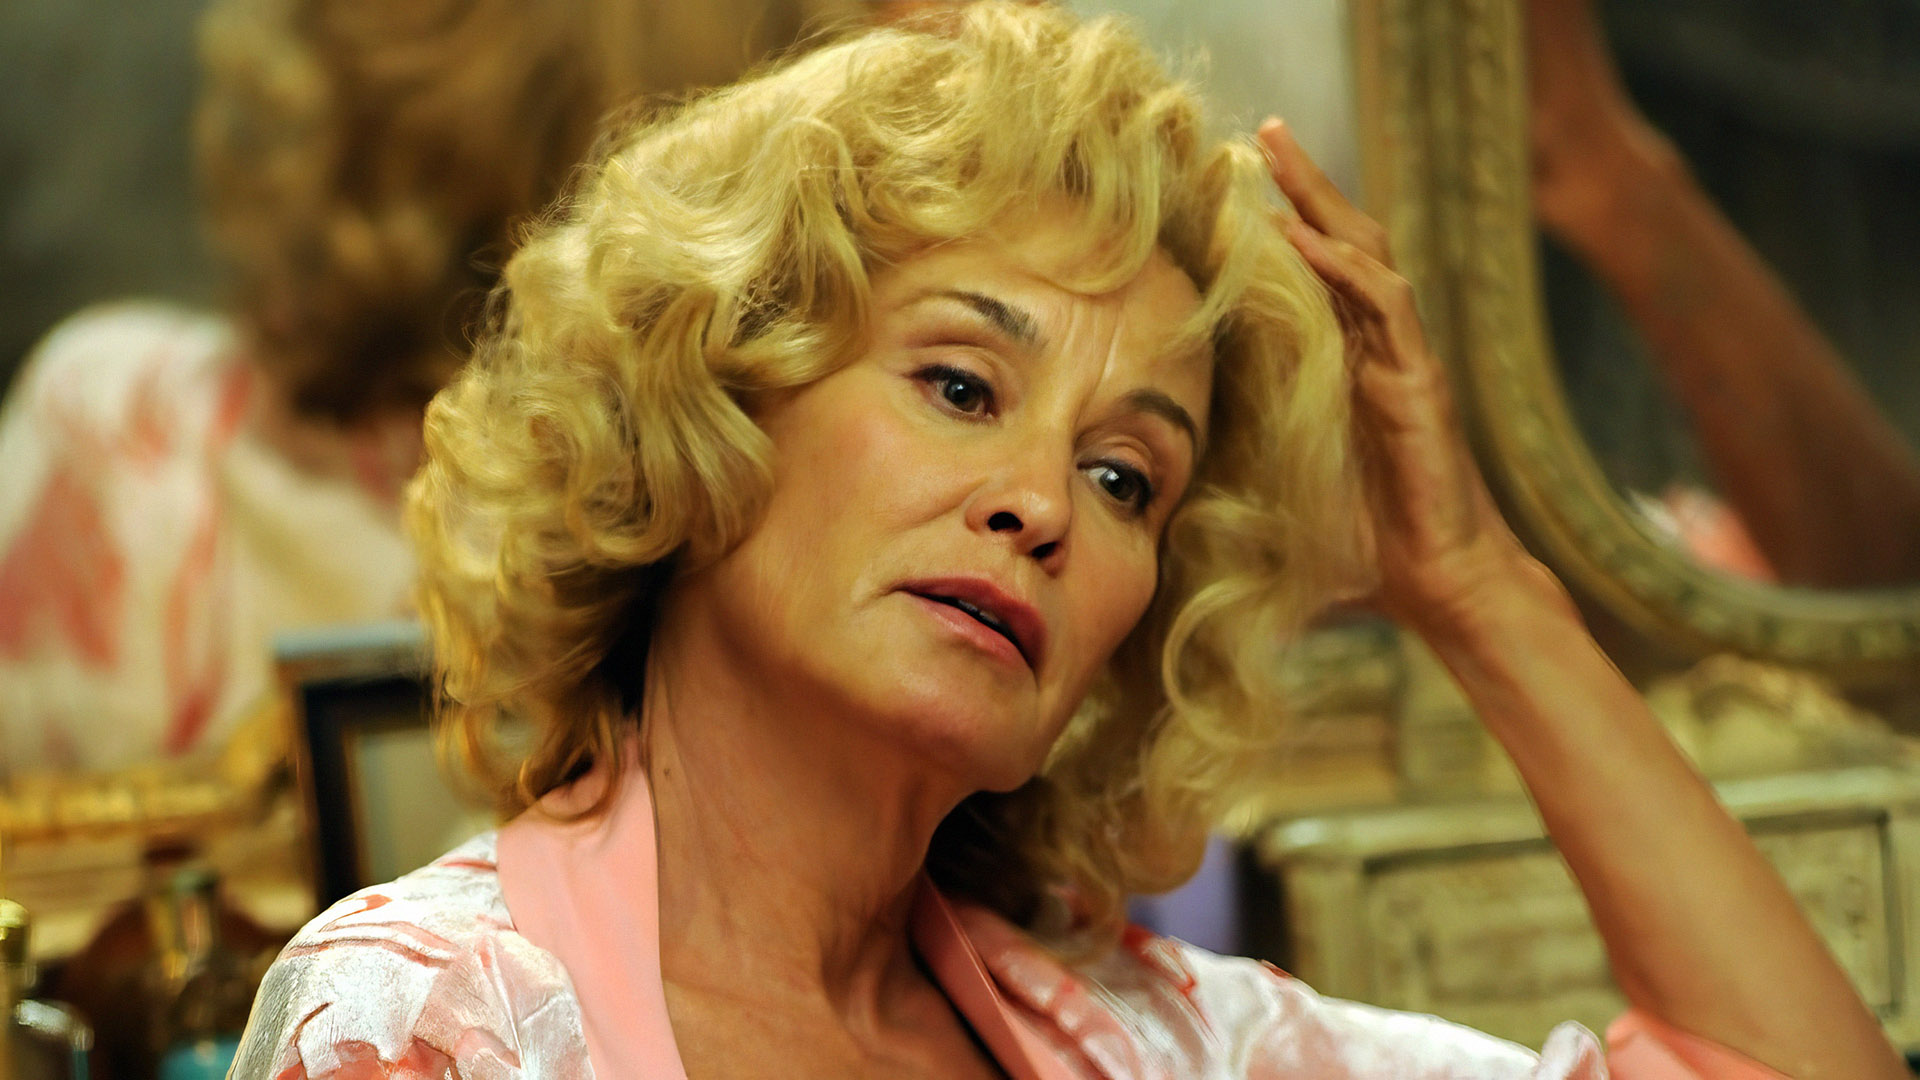 We Ranked Jessica Lange's AHS Roles, And The Winner Will Surprise You